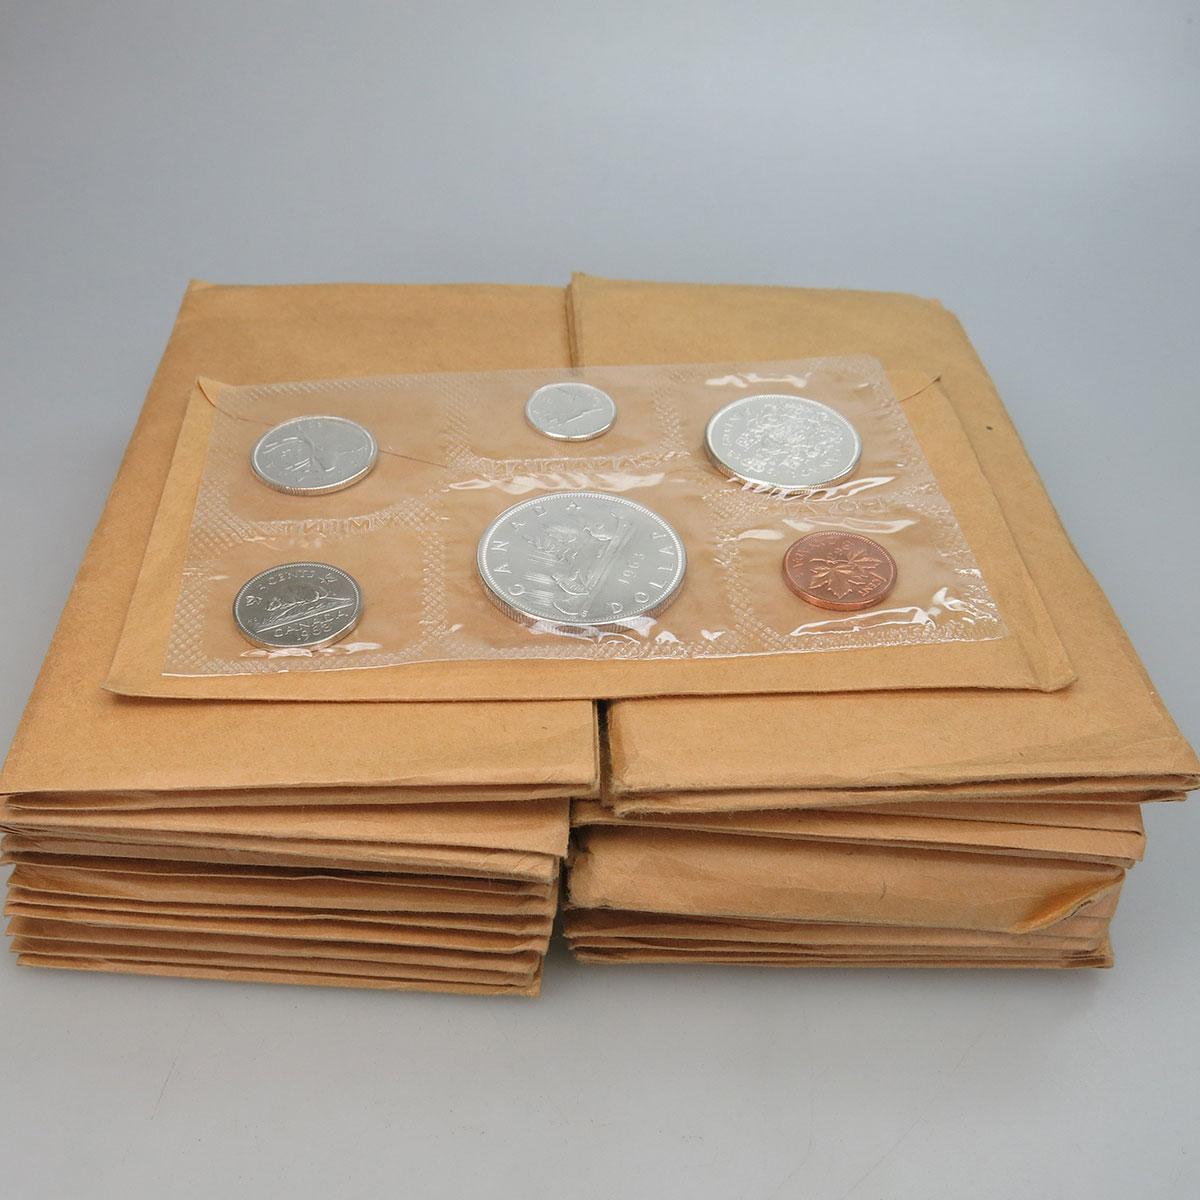 31 Canadian 1963 Uncirculated Coin Sets